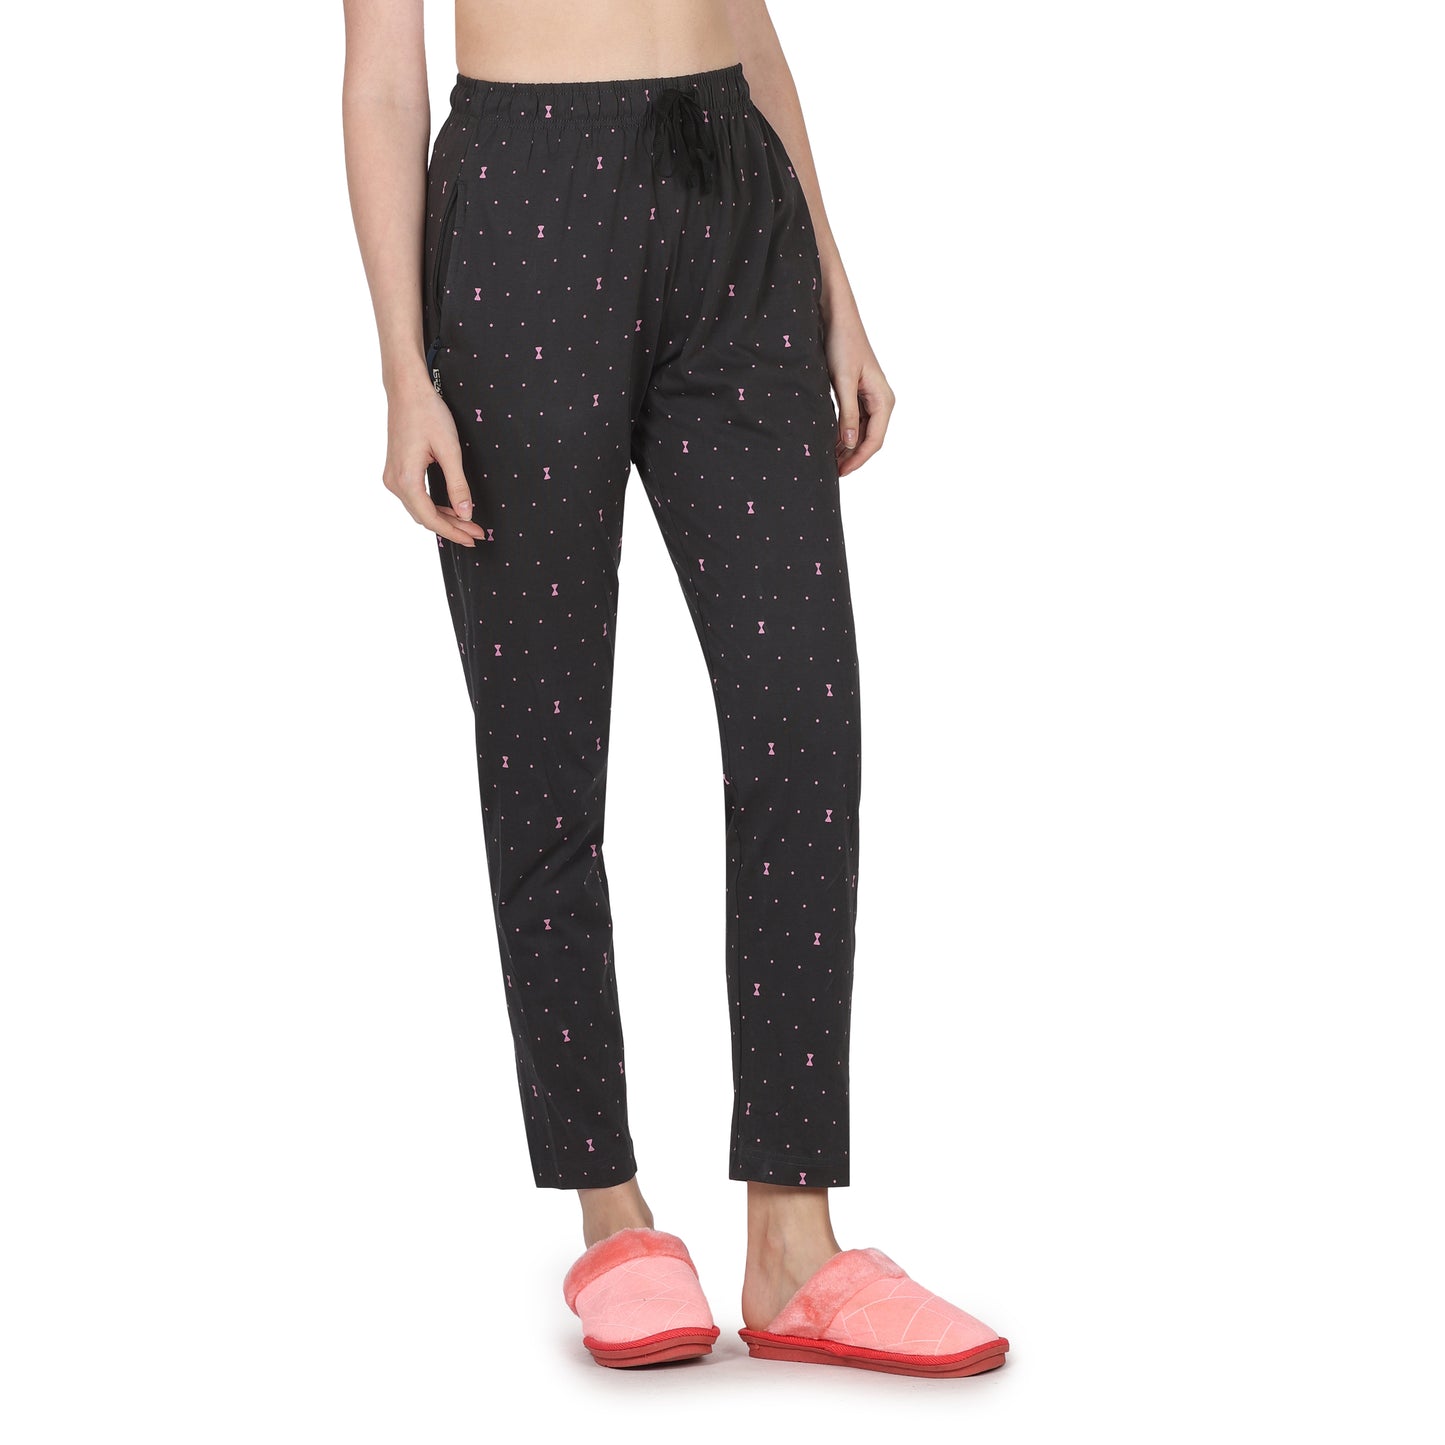 Eazy Women's Printed Lower - Pack of 5 - Black, Bright Red, Charcoal Grey, Pine Green & Light Pink